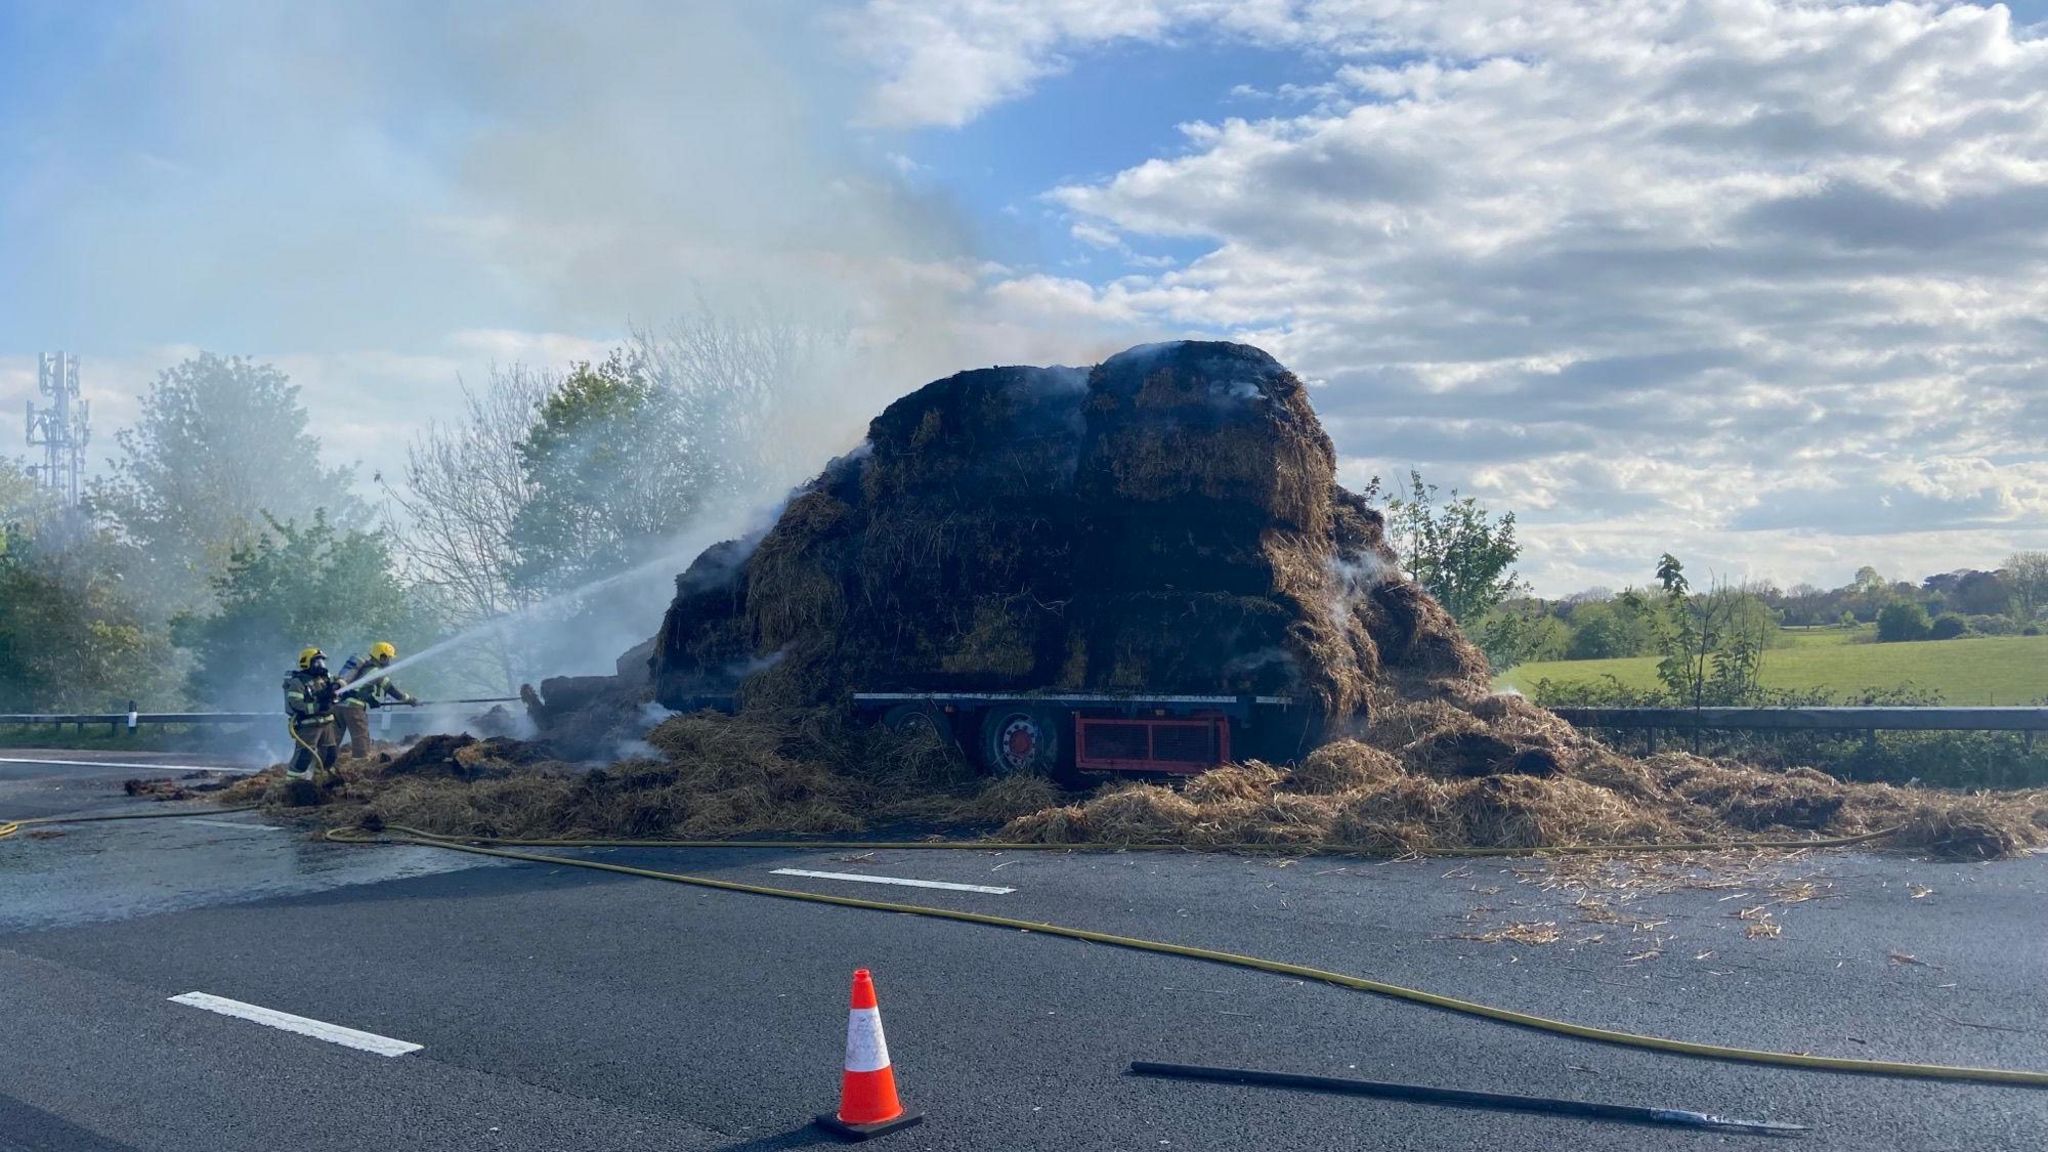 Fire crews blast a lorry carrying hay, which is on fire, with water hoses